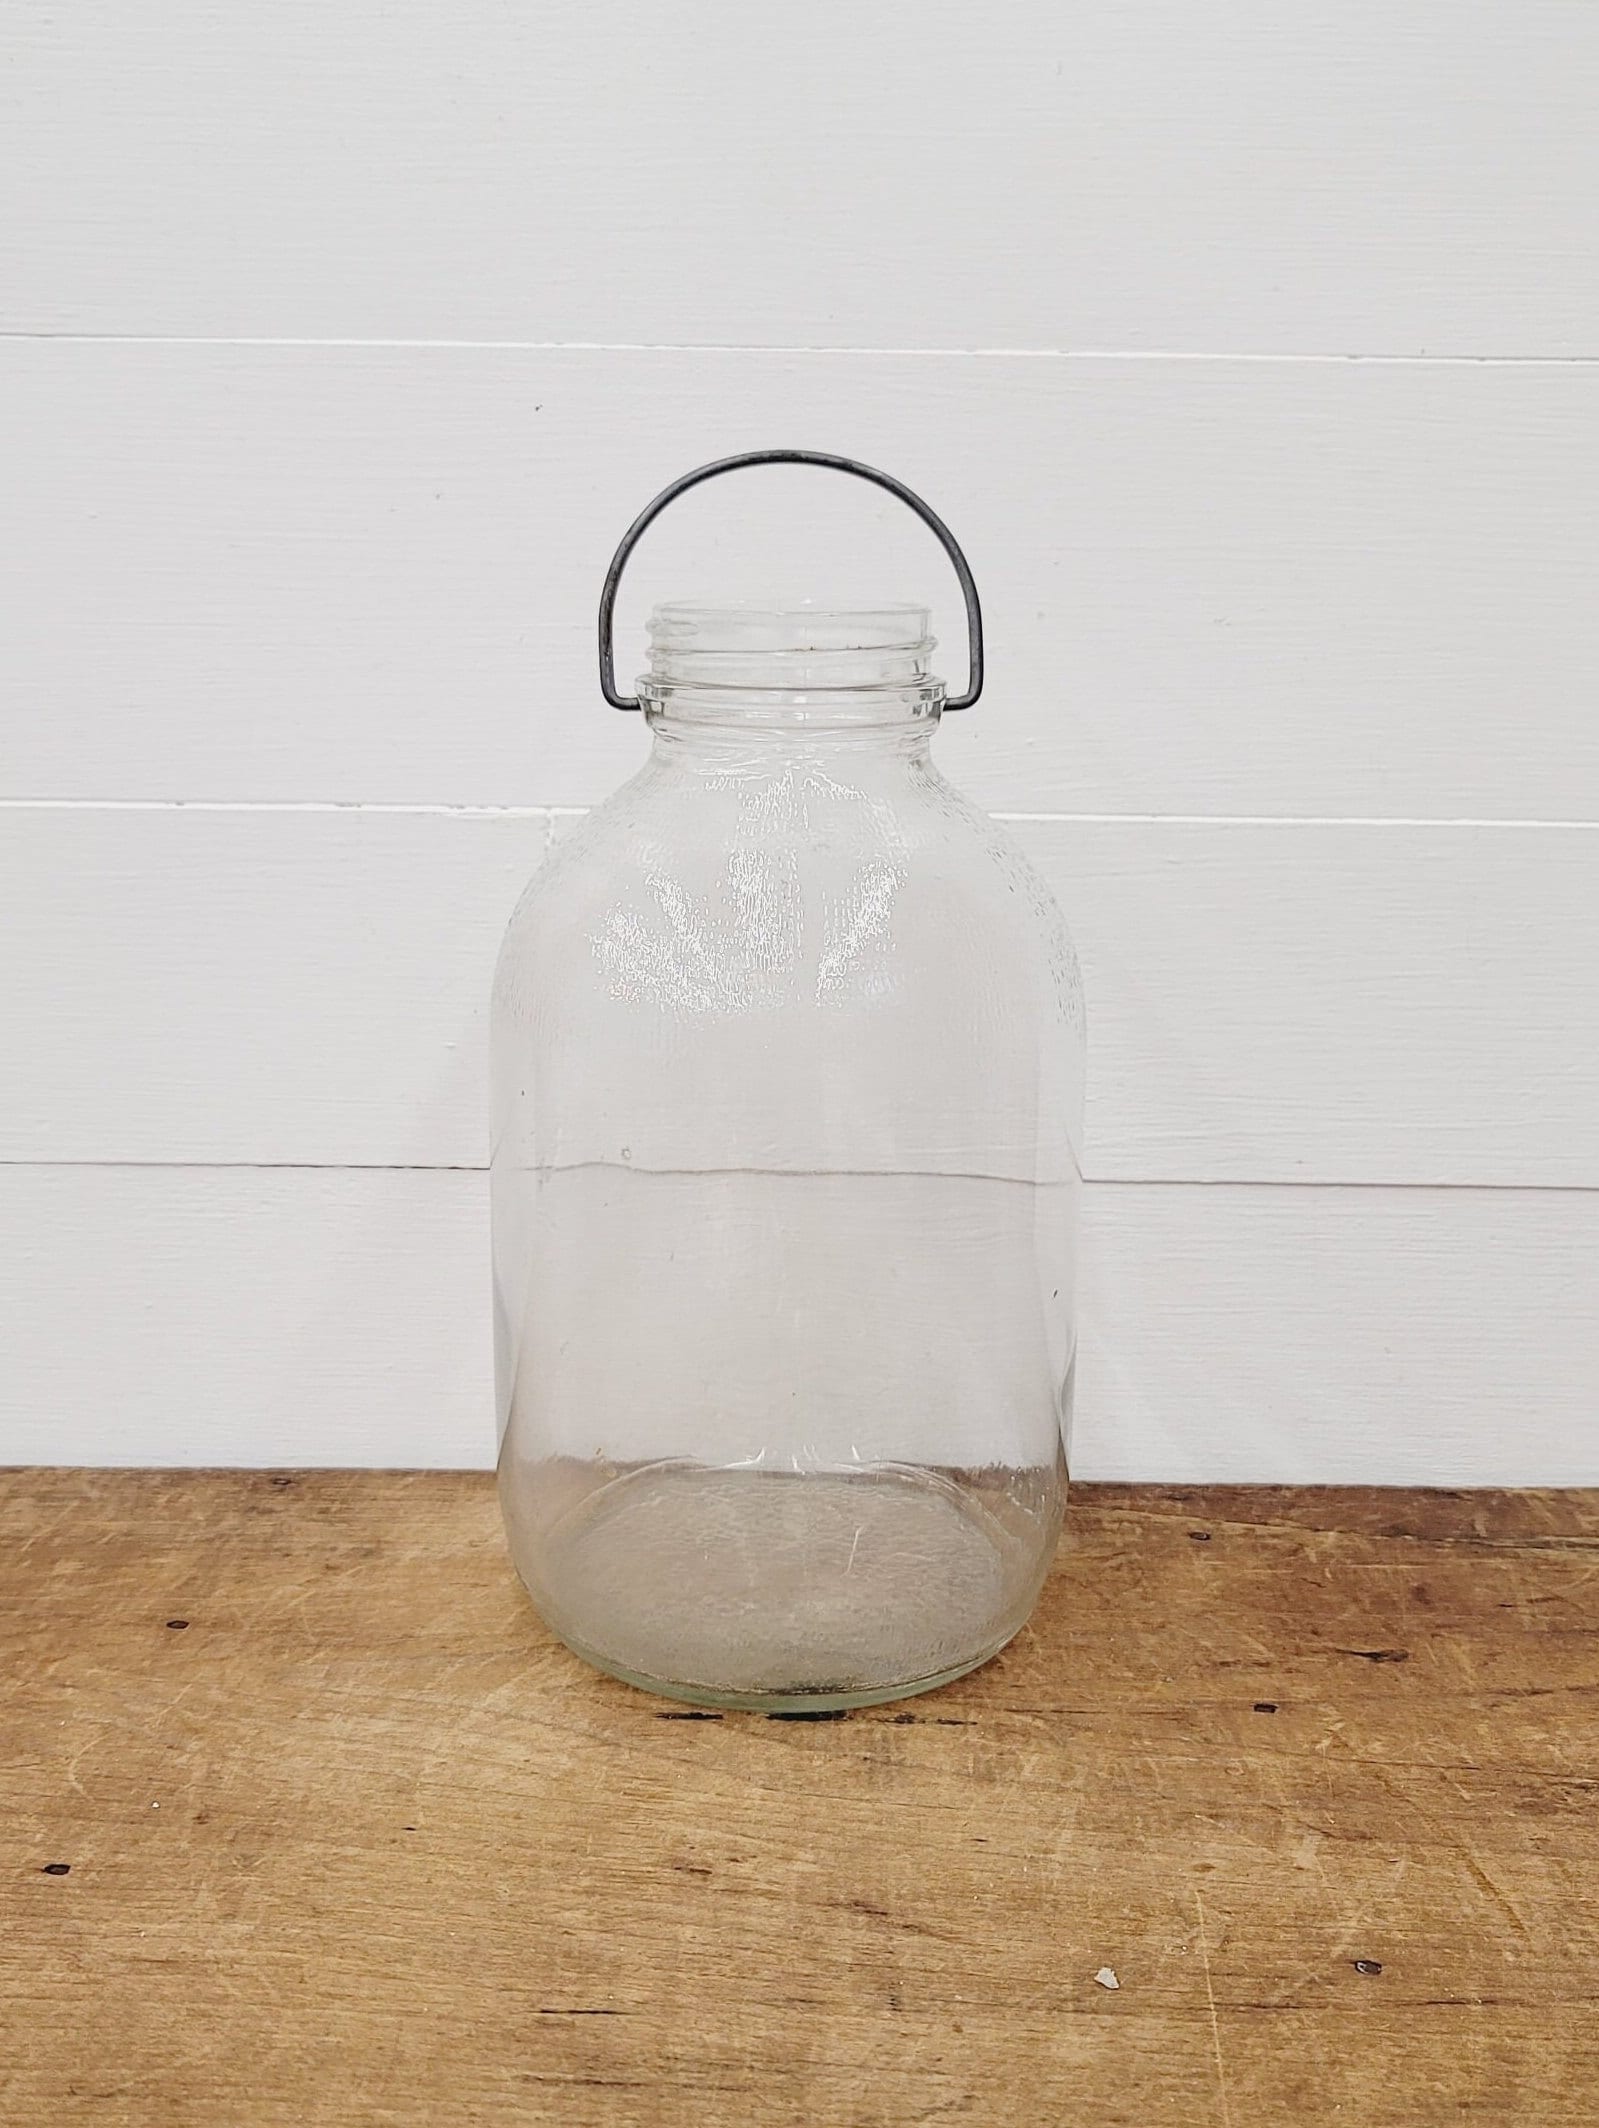 Vintage Duraglas 1 Gallon Glass Jar With Lid, Large Glass Container With Lid  